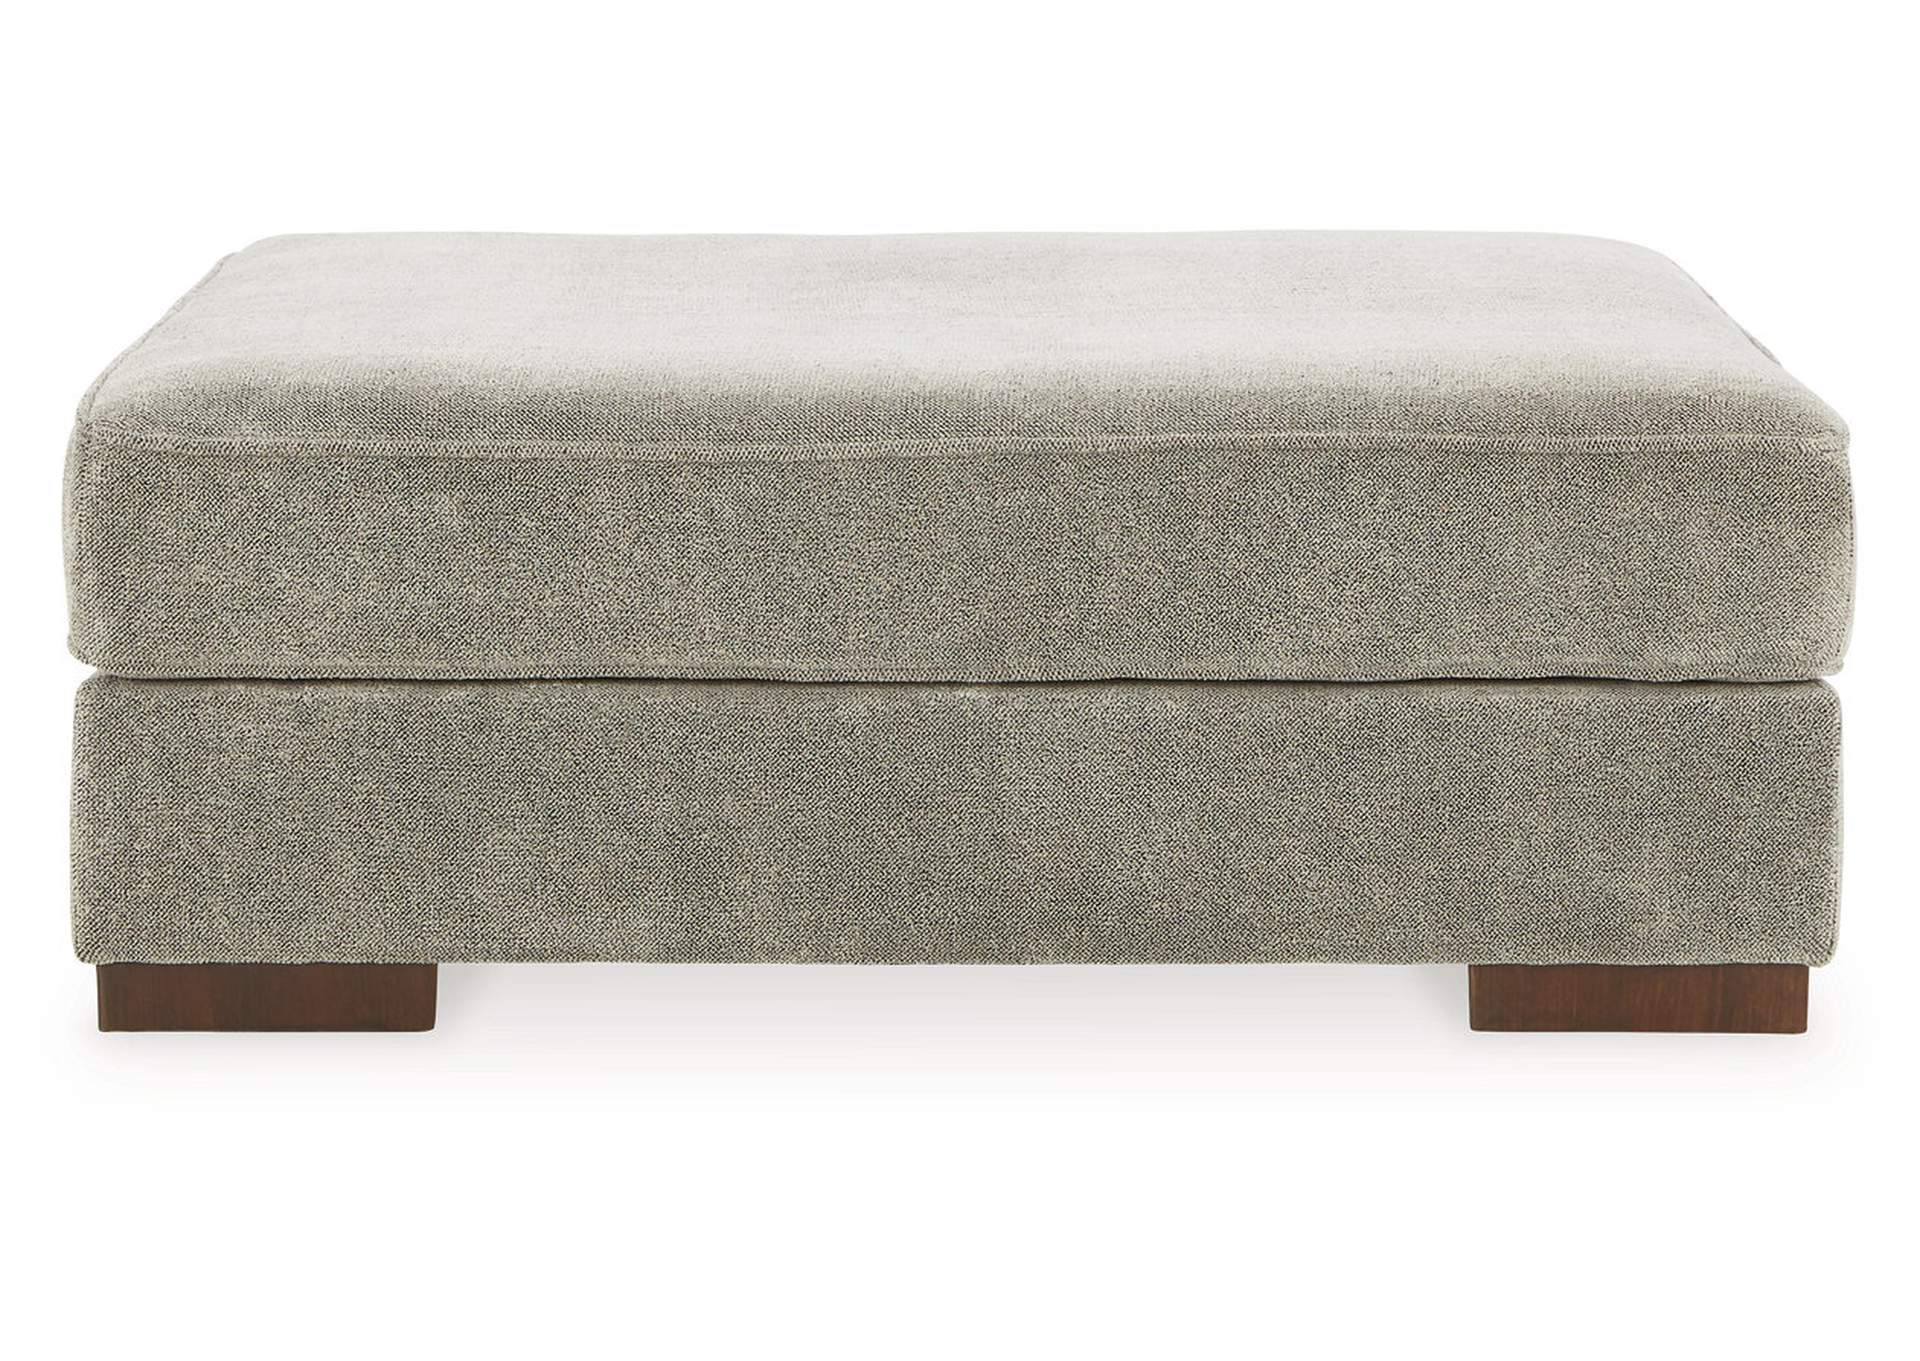 Bayless Oversized Accent Ottoman,Signature Design By Ashley